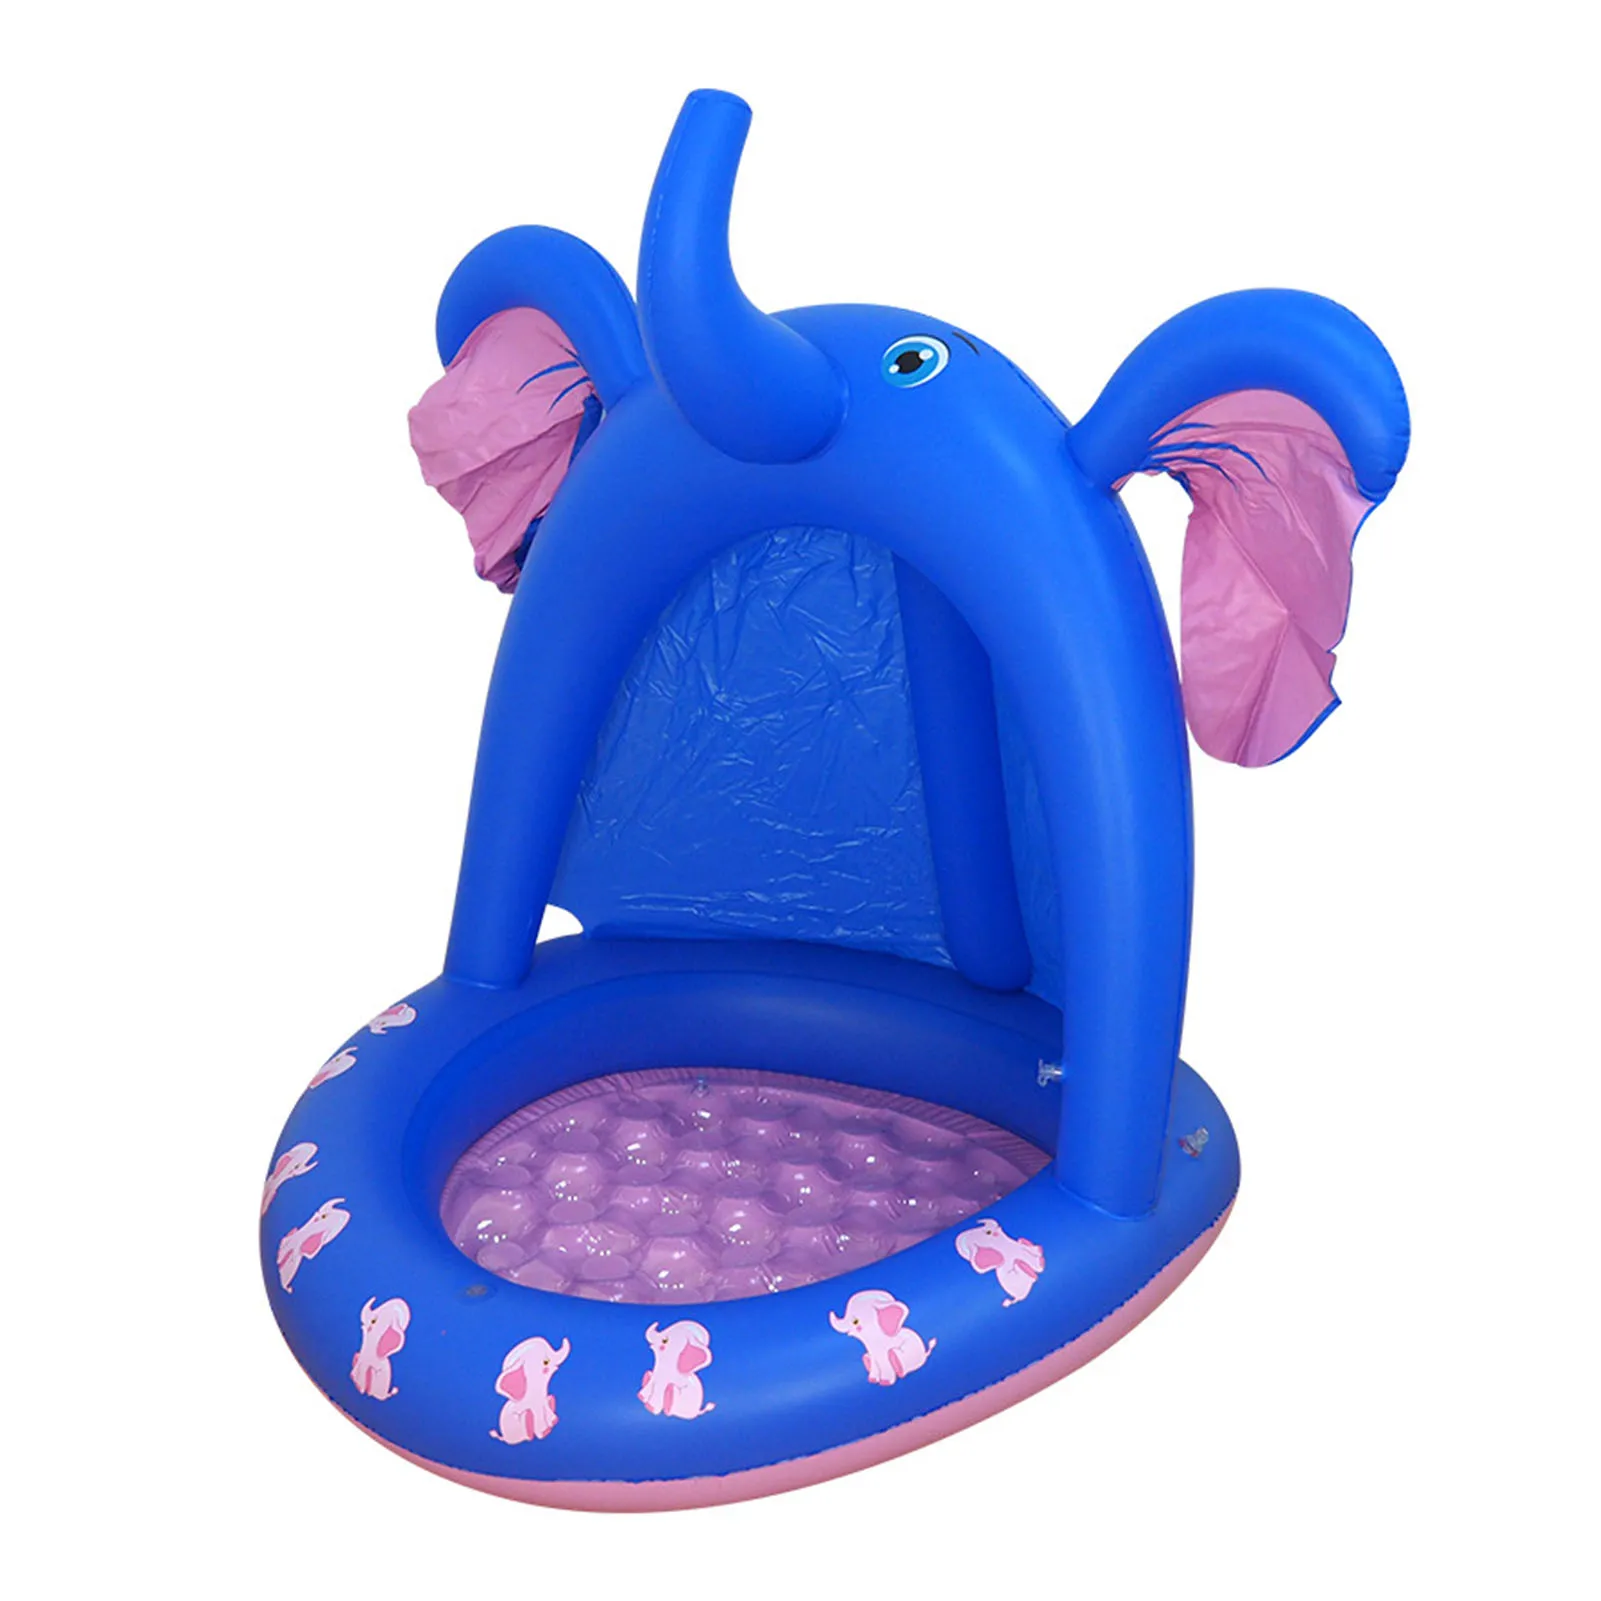 

Elephant Inflatable Fountain Baby Swimming Pool Baby Pool Sprinkler Inflatable Kiddie Pool for Toddlers with Canopy Splash